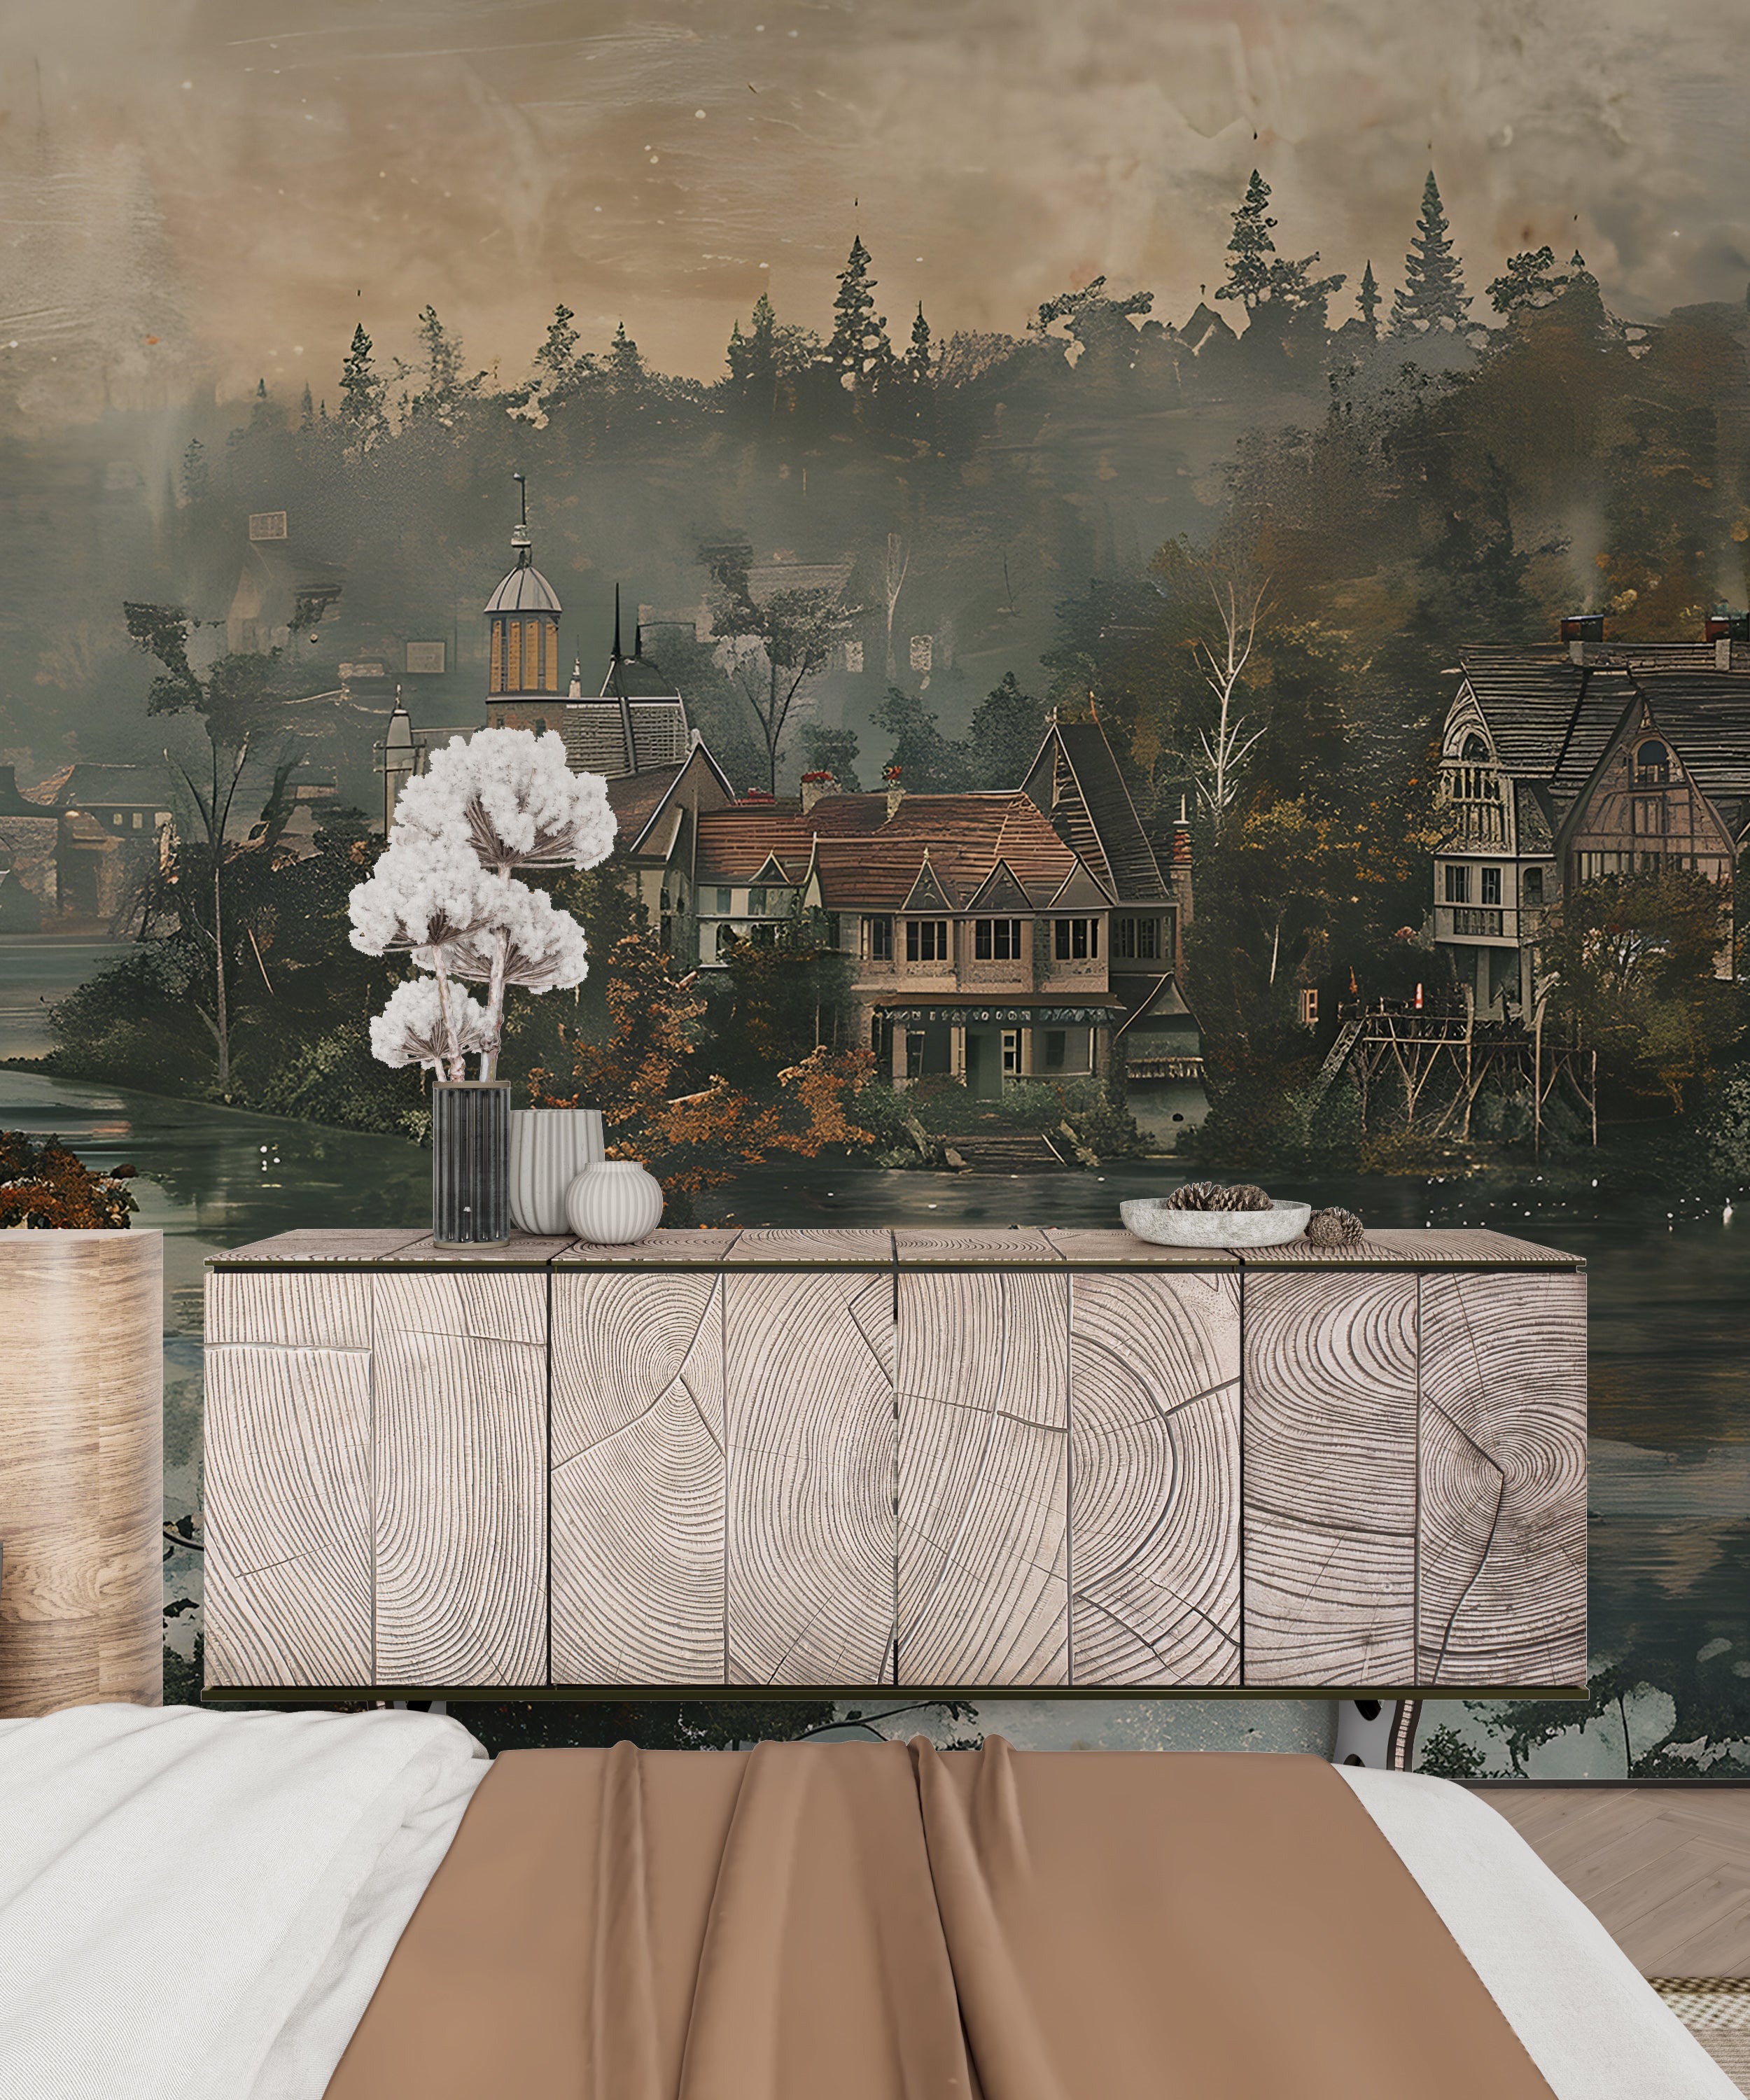 Rustic Riverscape Vintage Wallpaper Mural Timeless Watercolor Forest River Wall Decor